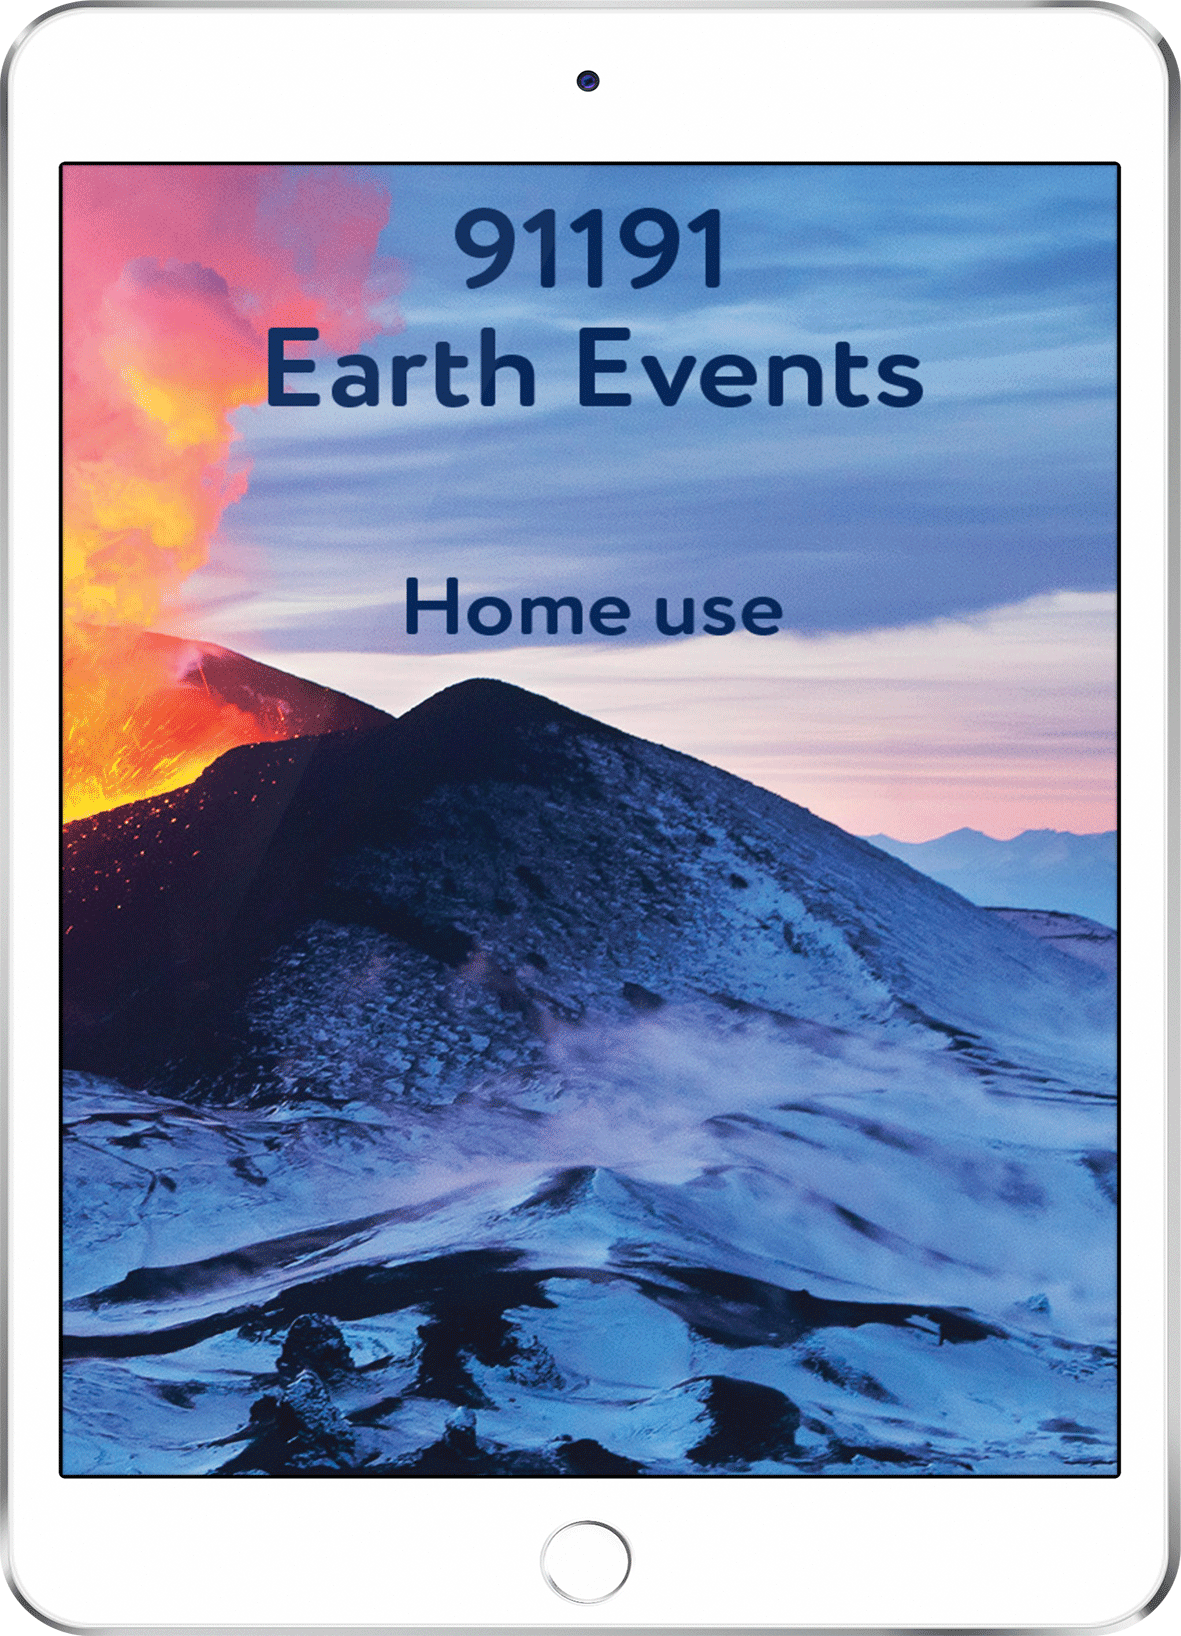 91191 Earth Events - Home Use